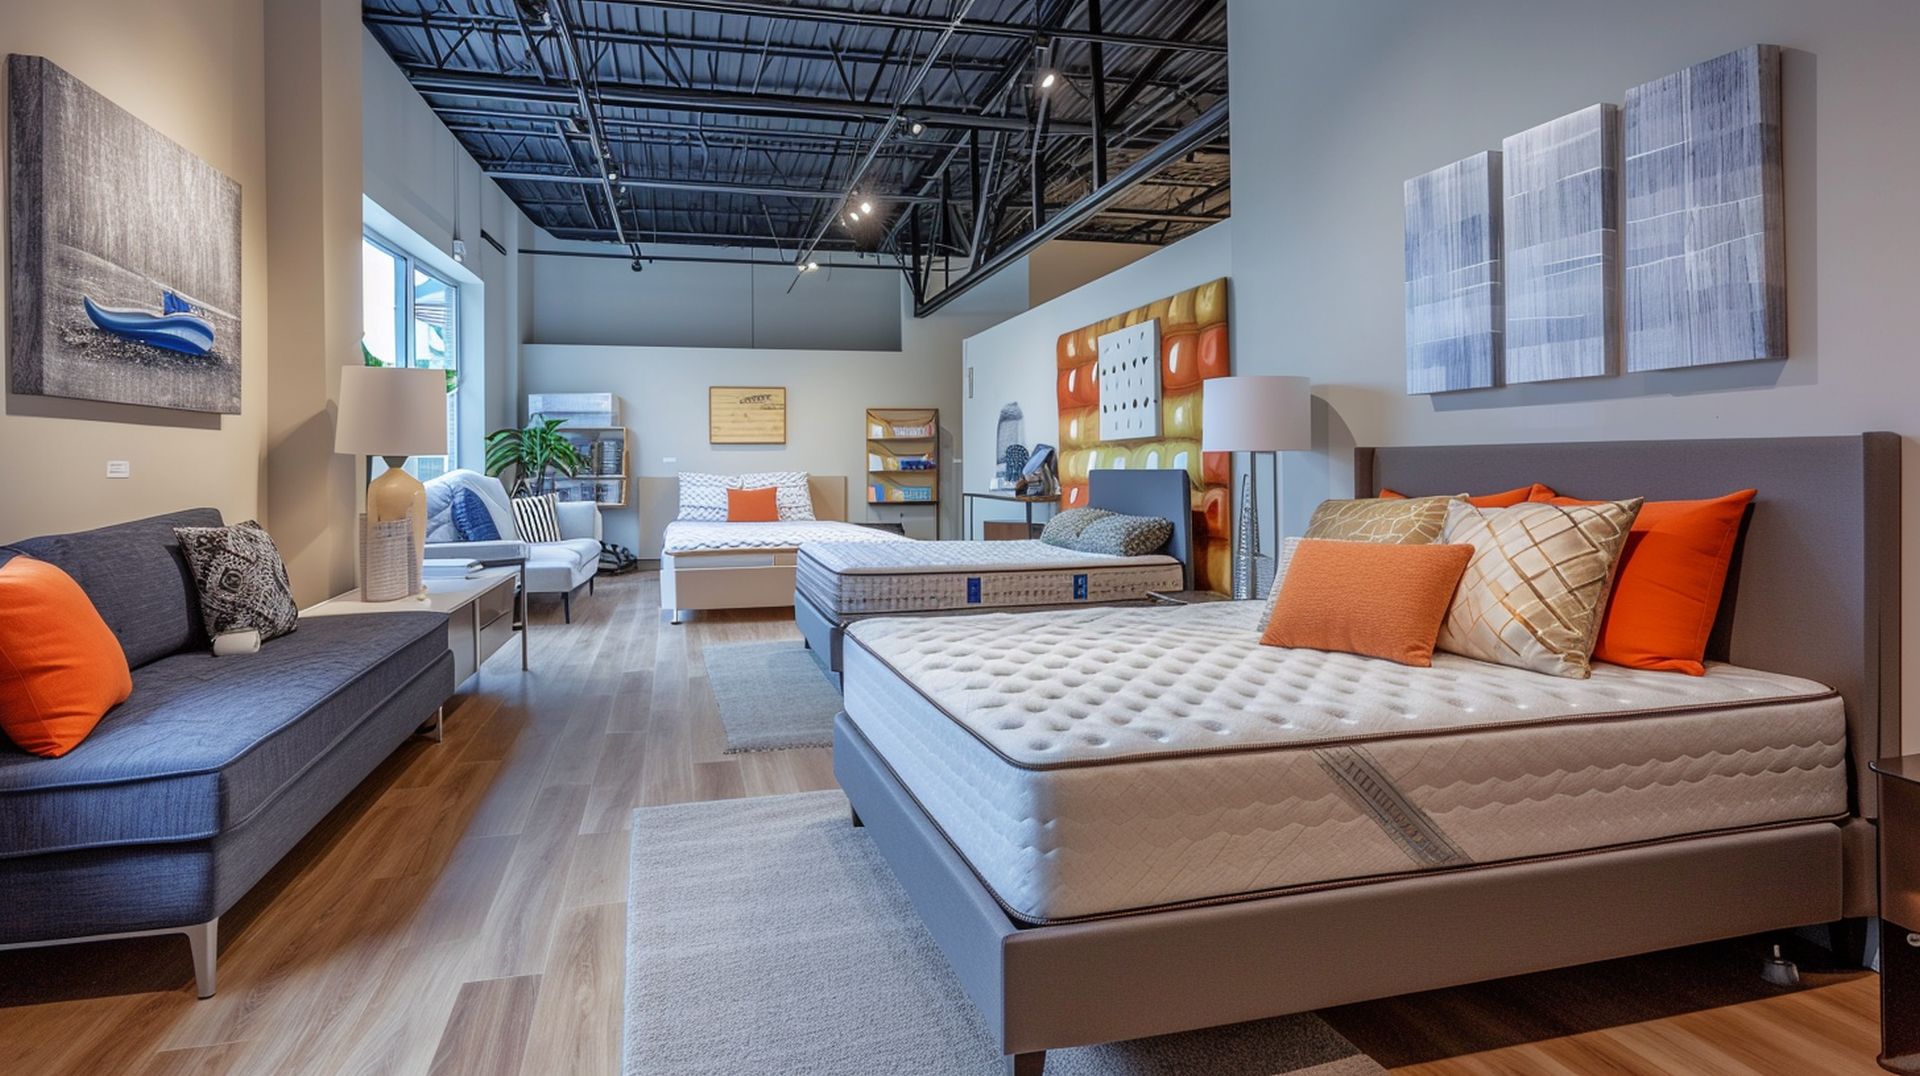 If you're looking for a new bed, mattress stores in Baltimore offer the best customer and delivery service, financing, and warranties in Maryland